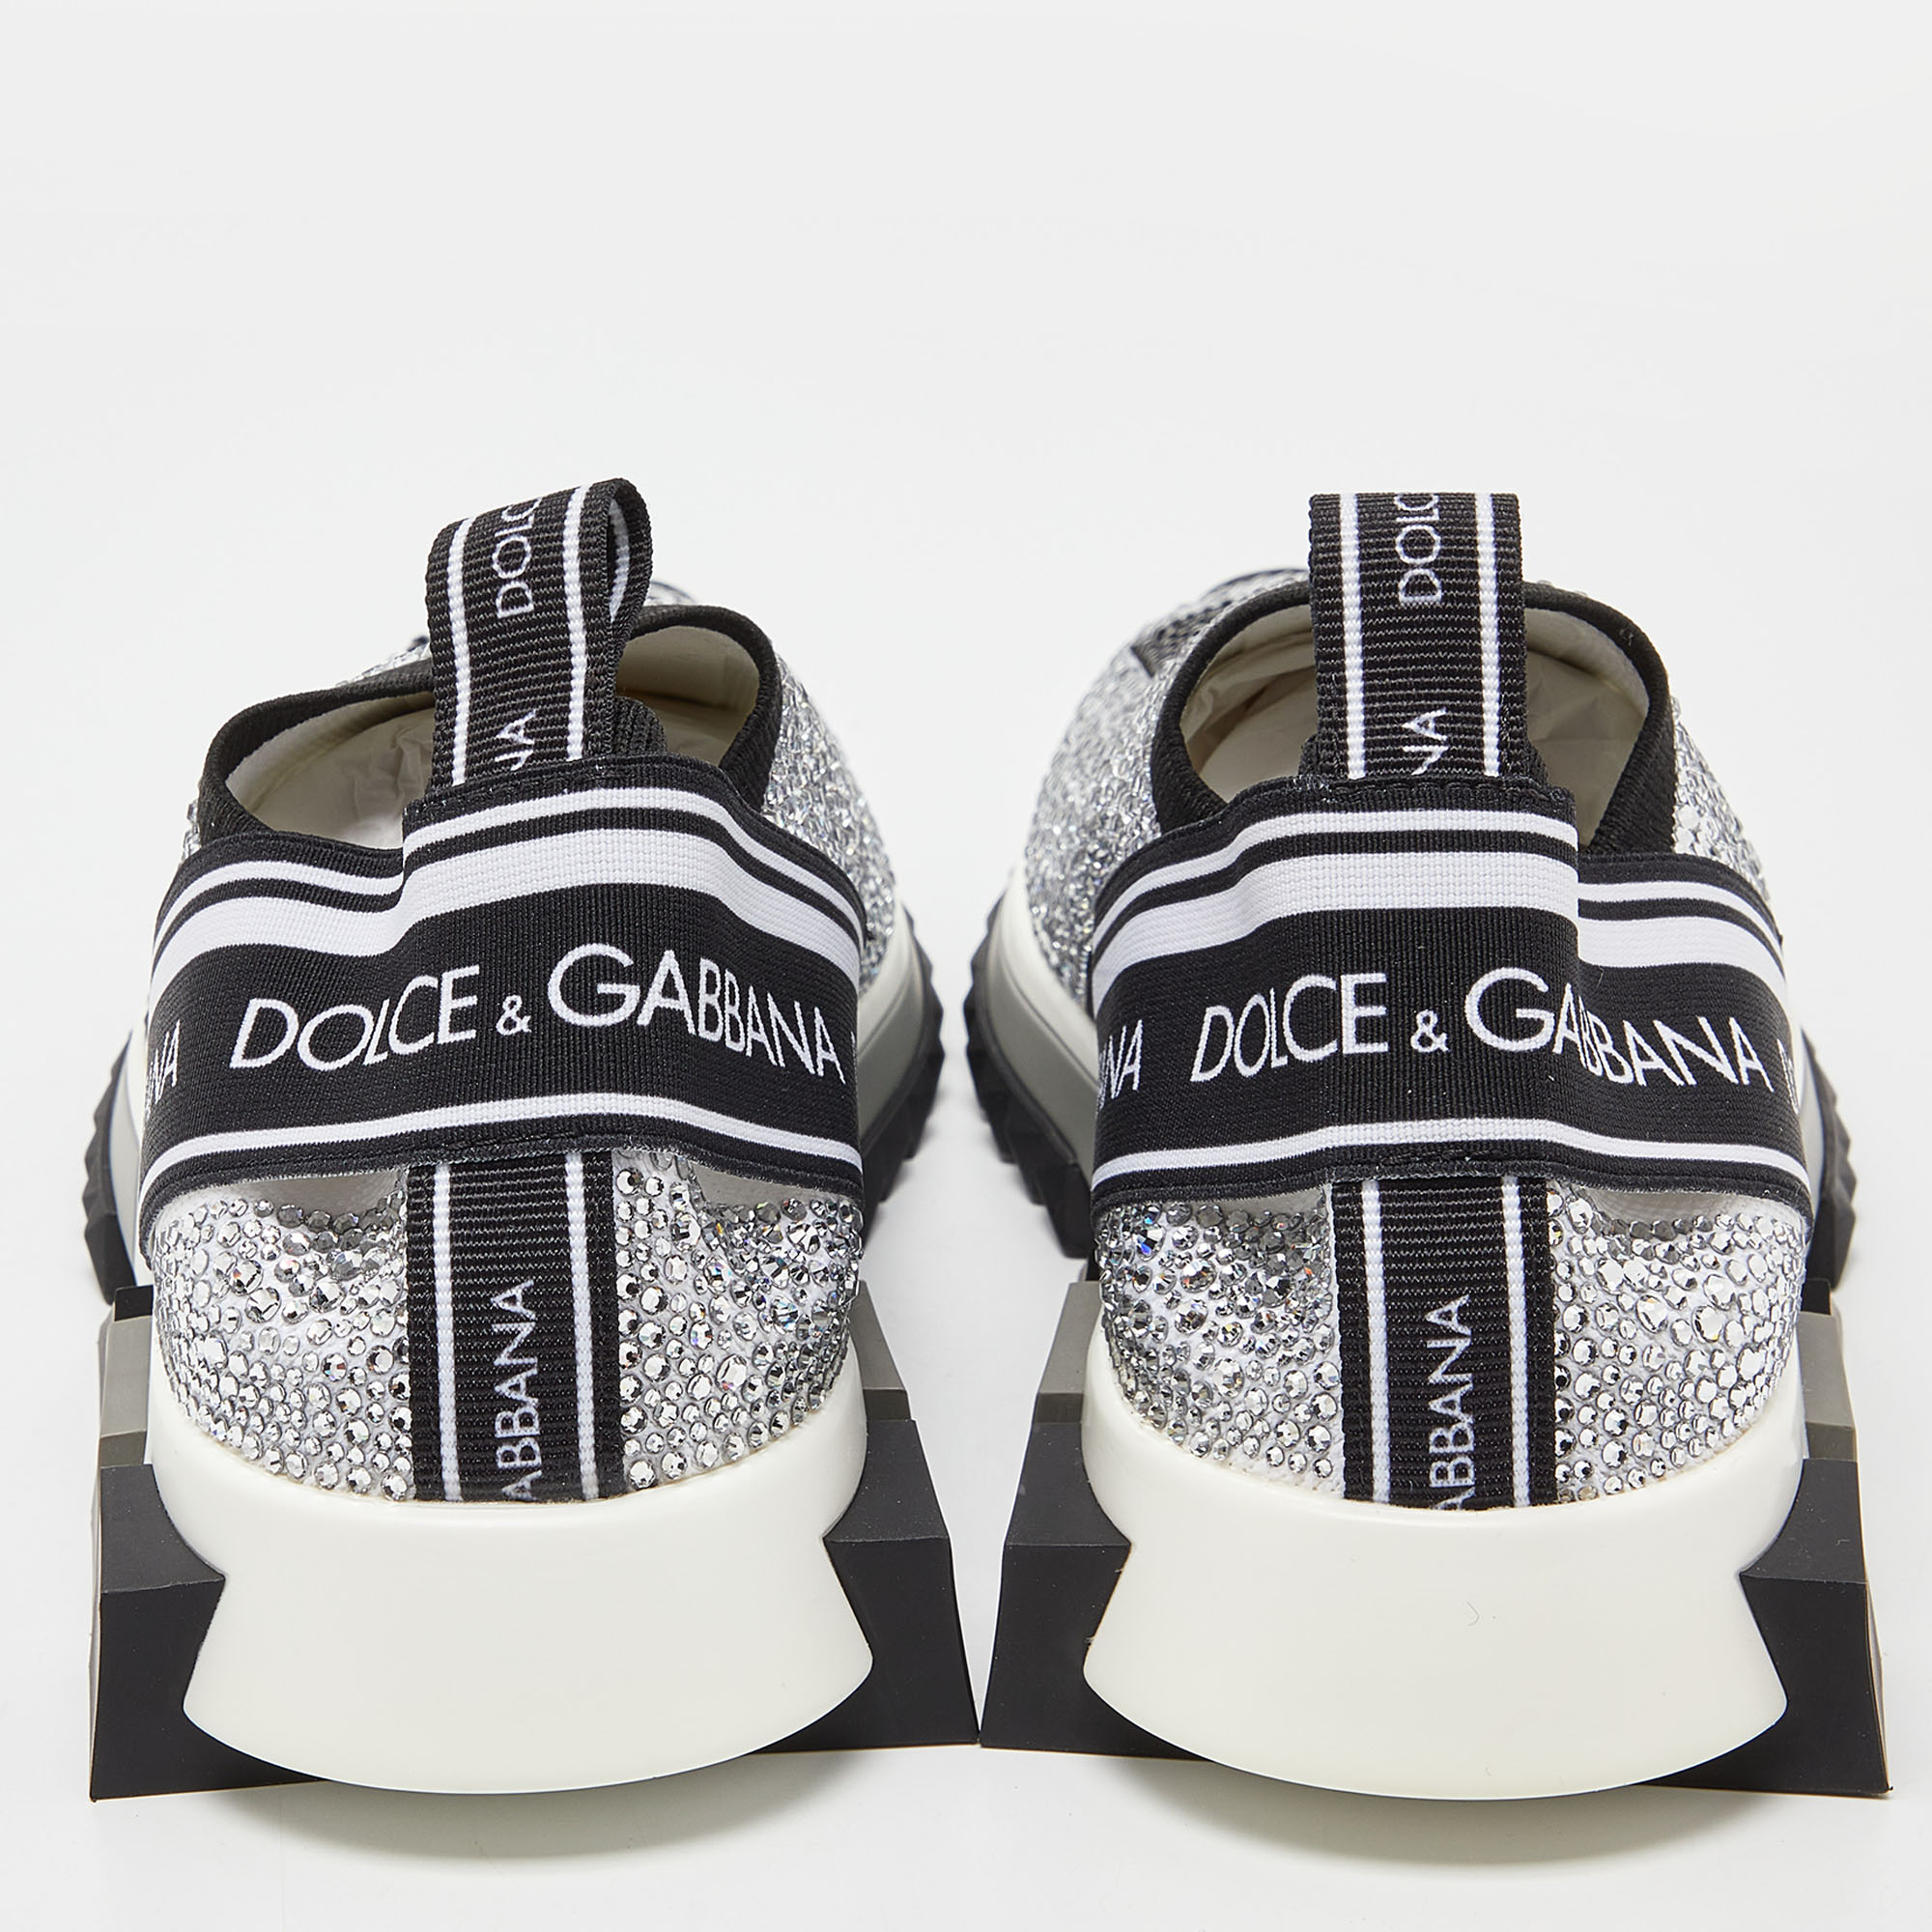 Dolce & Gabbana Silver/Black Fabric Crystal Embellished Sorrento Sneakers Size 38.5